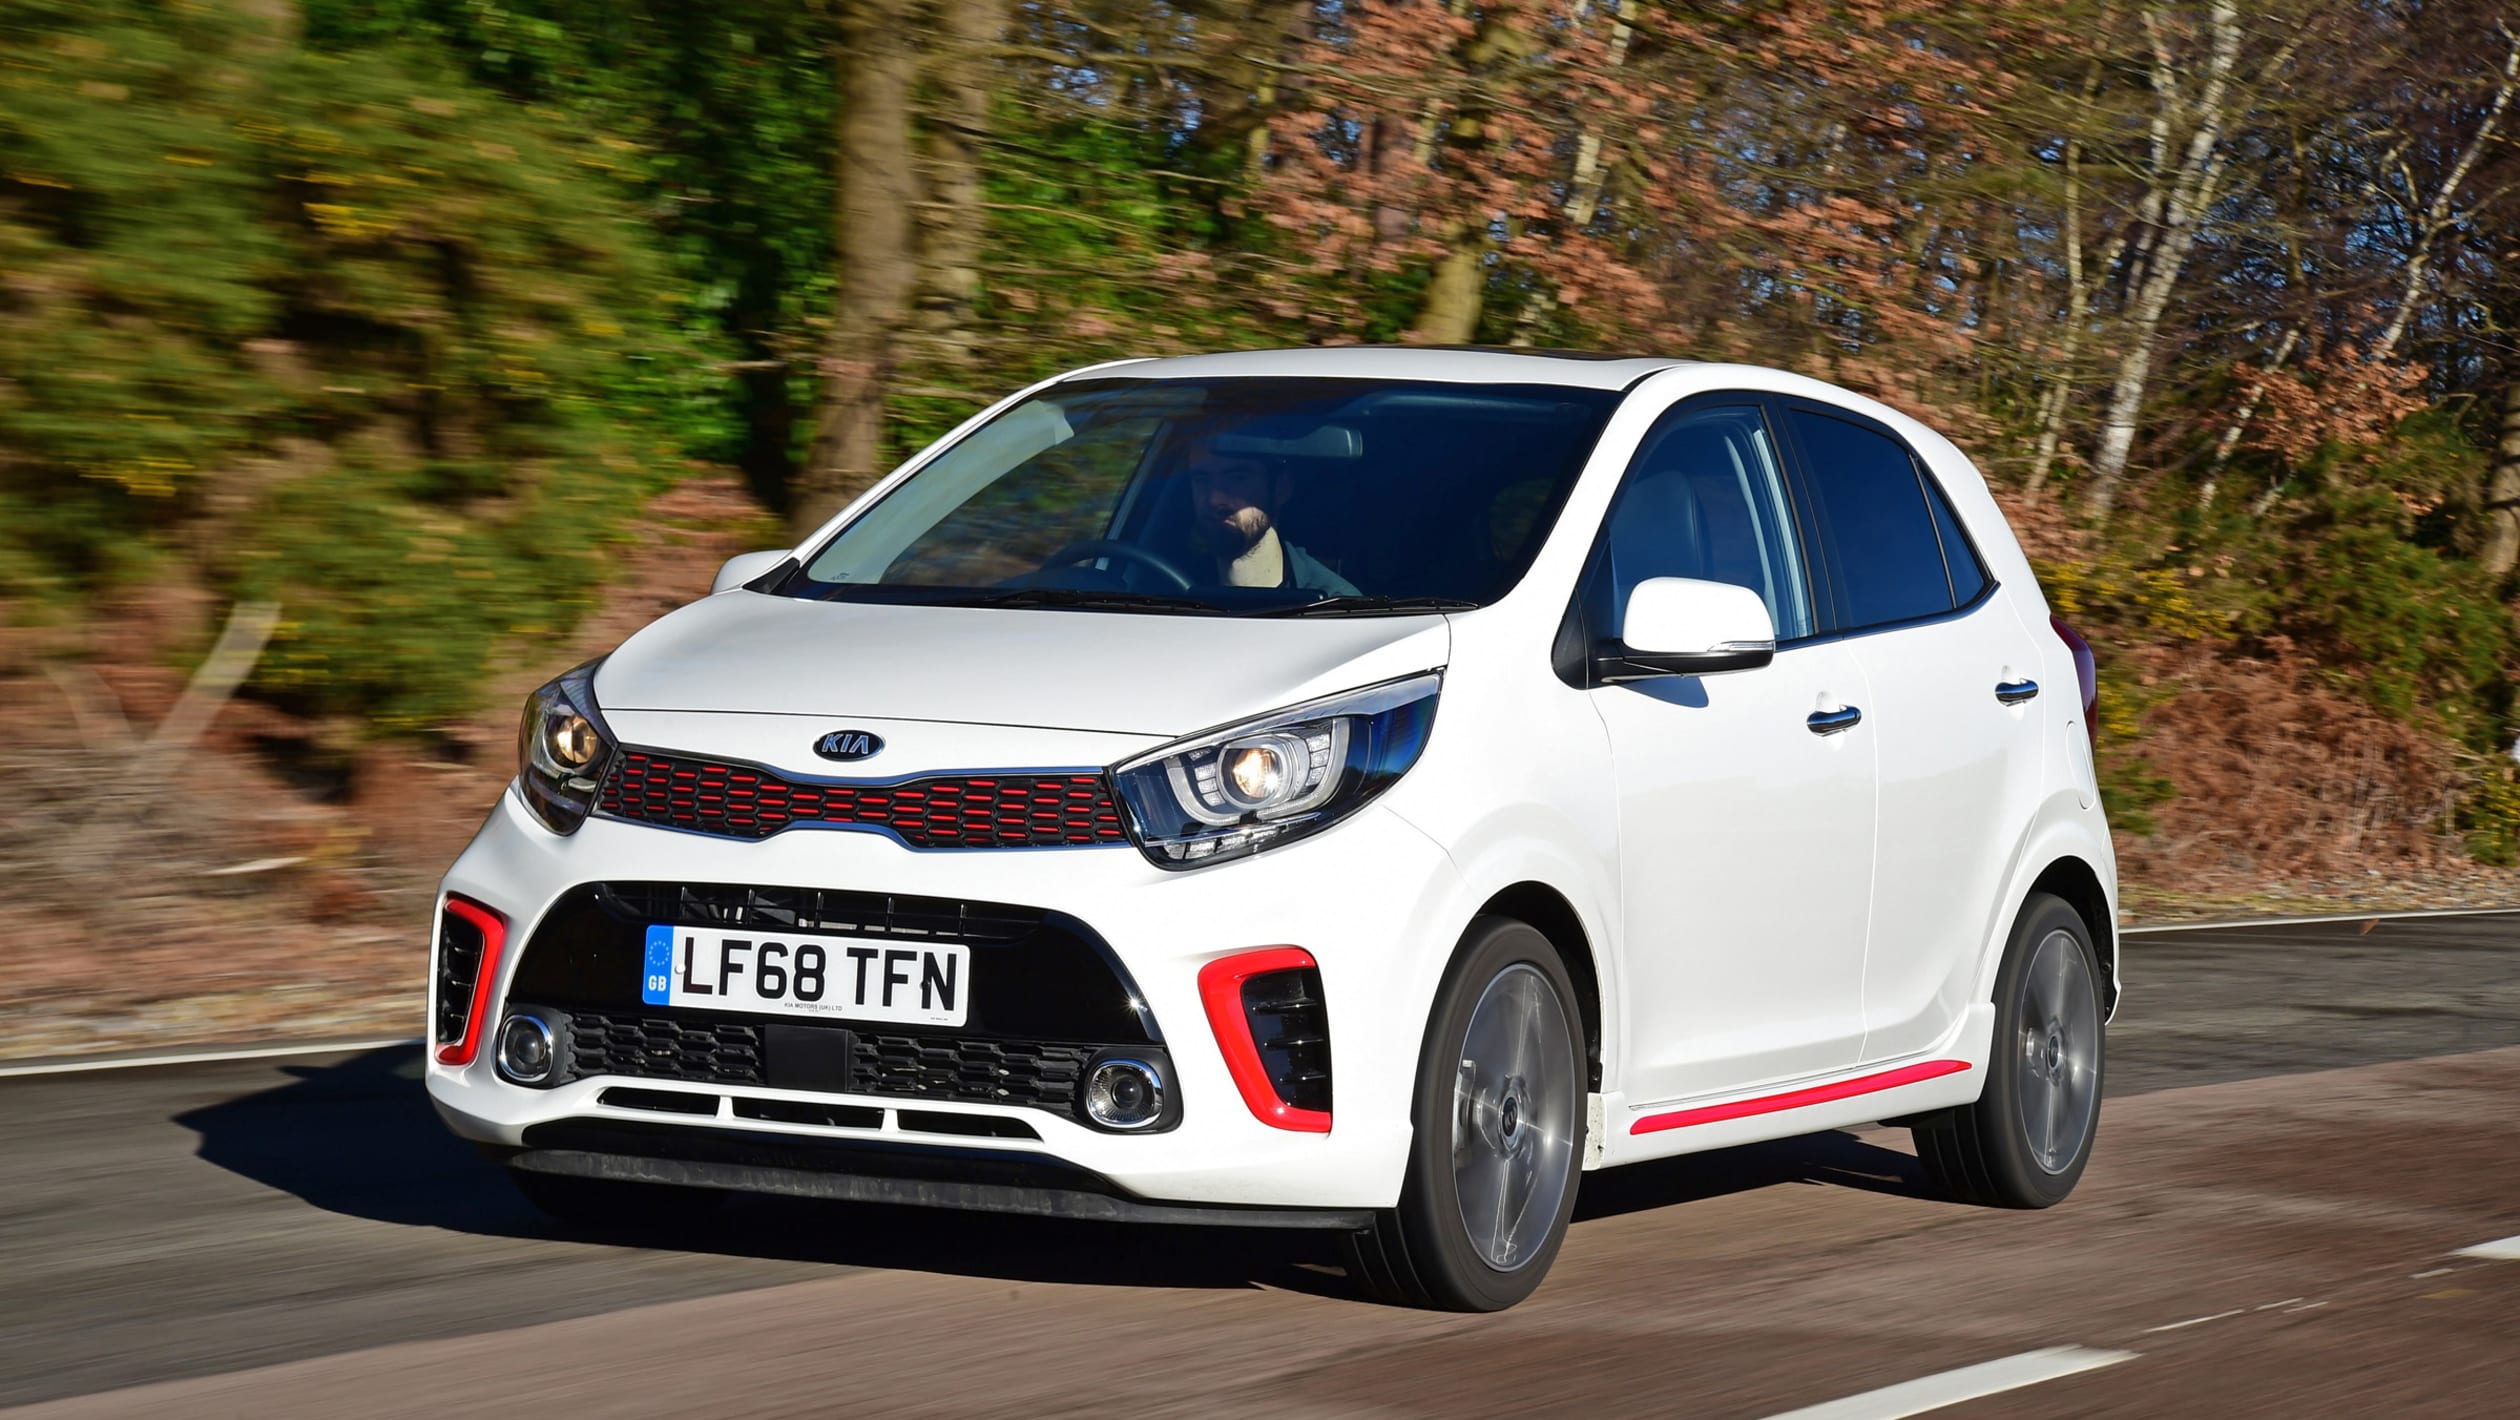 Kia Picanto Owner Reviews MPG, Problems & Reliability